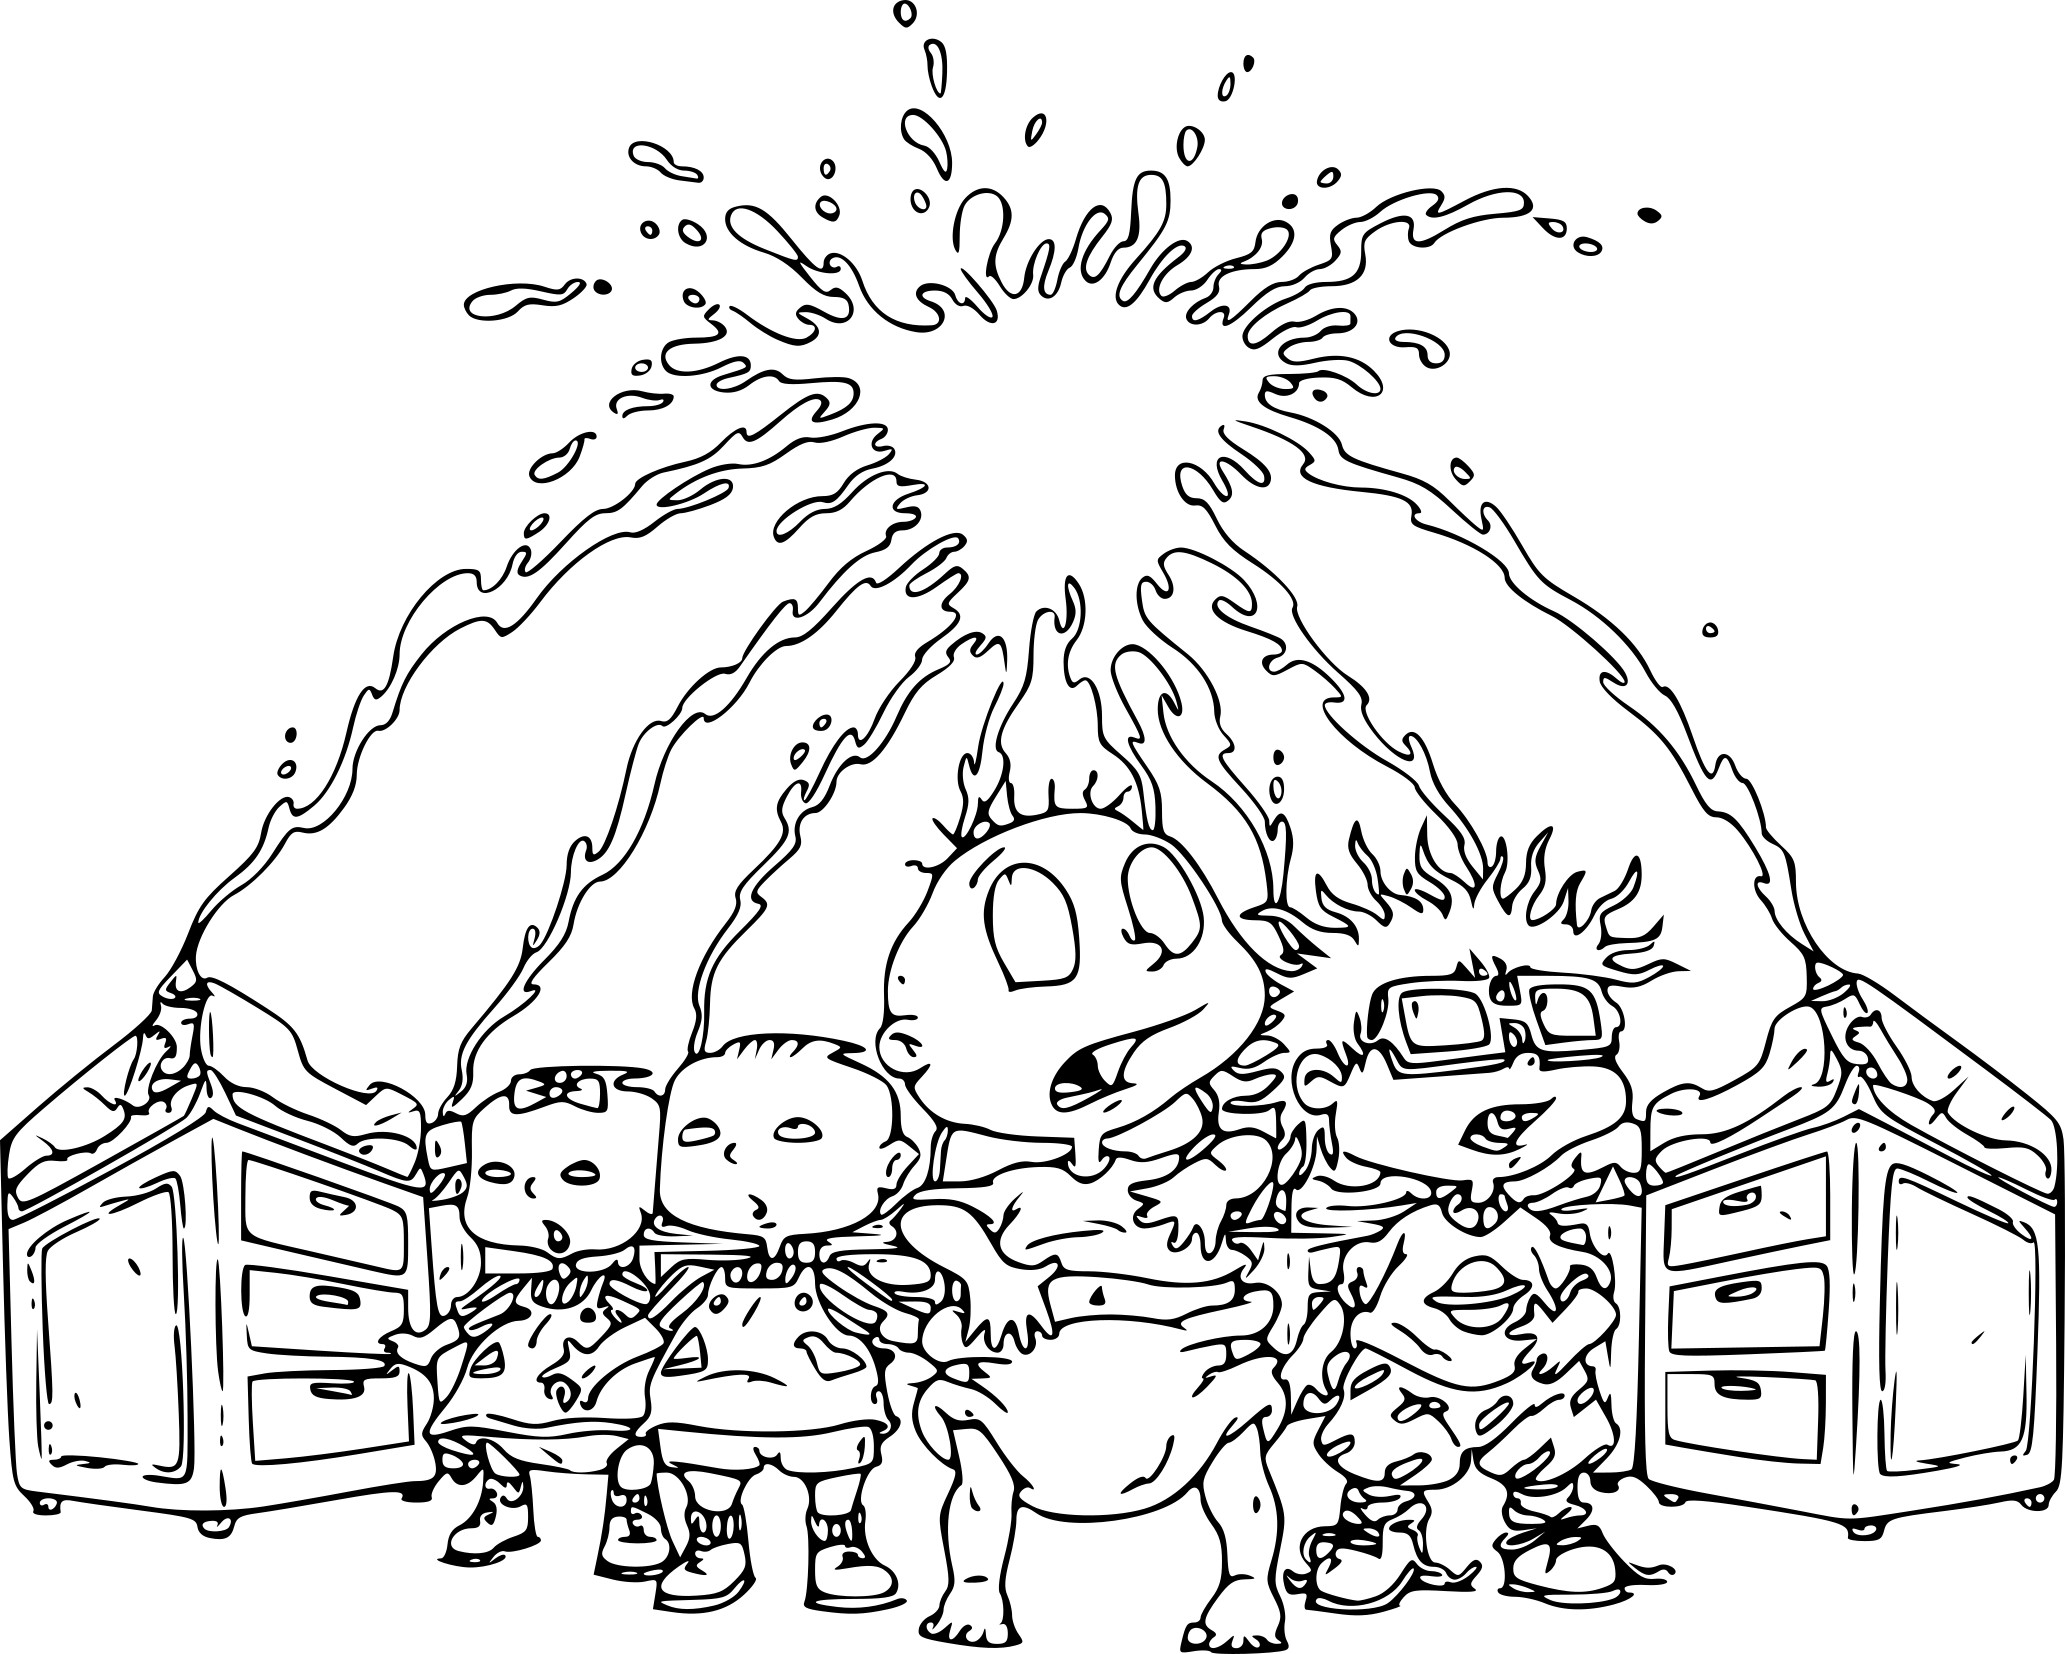 The Razmoket drawing and coloring page